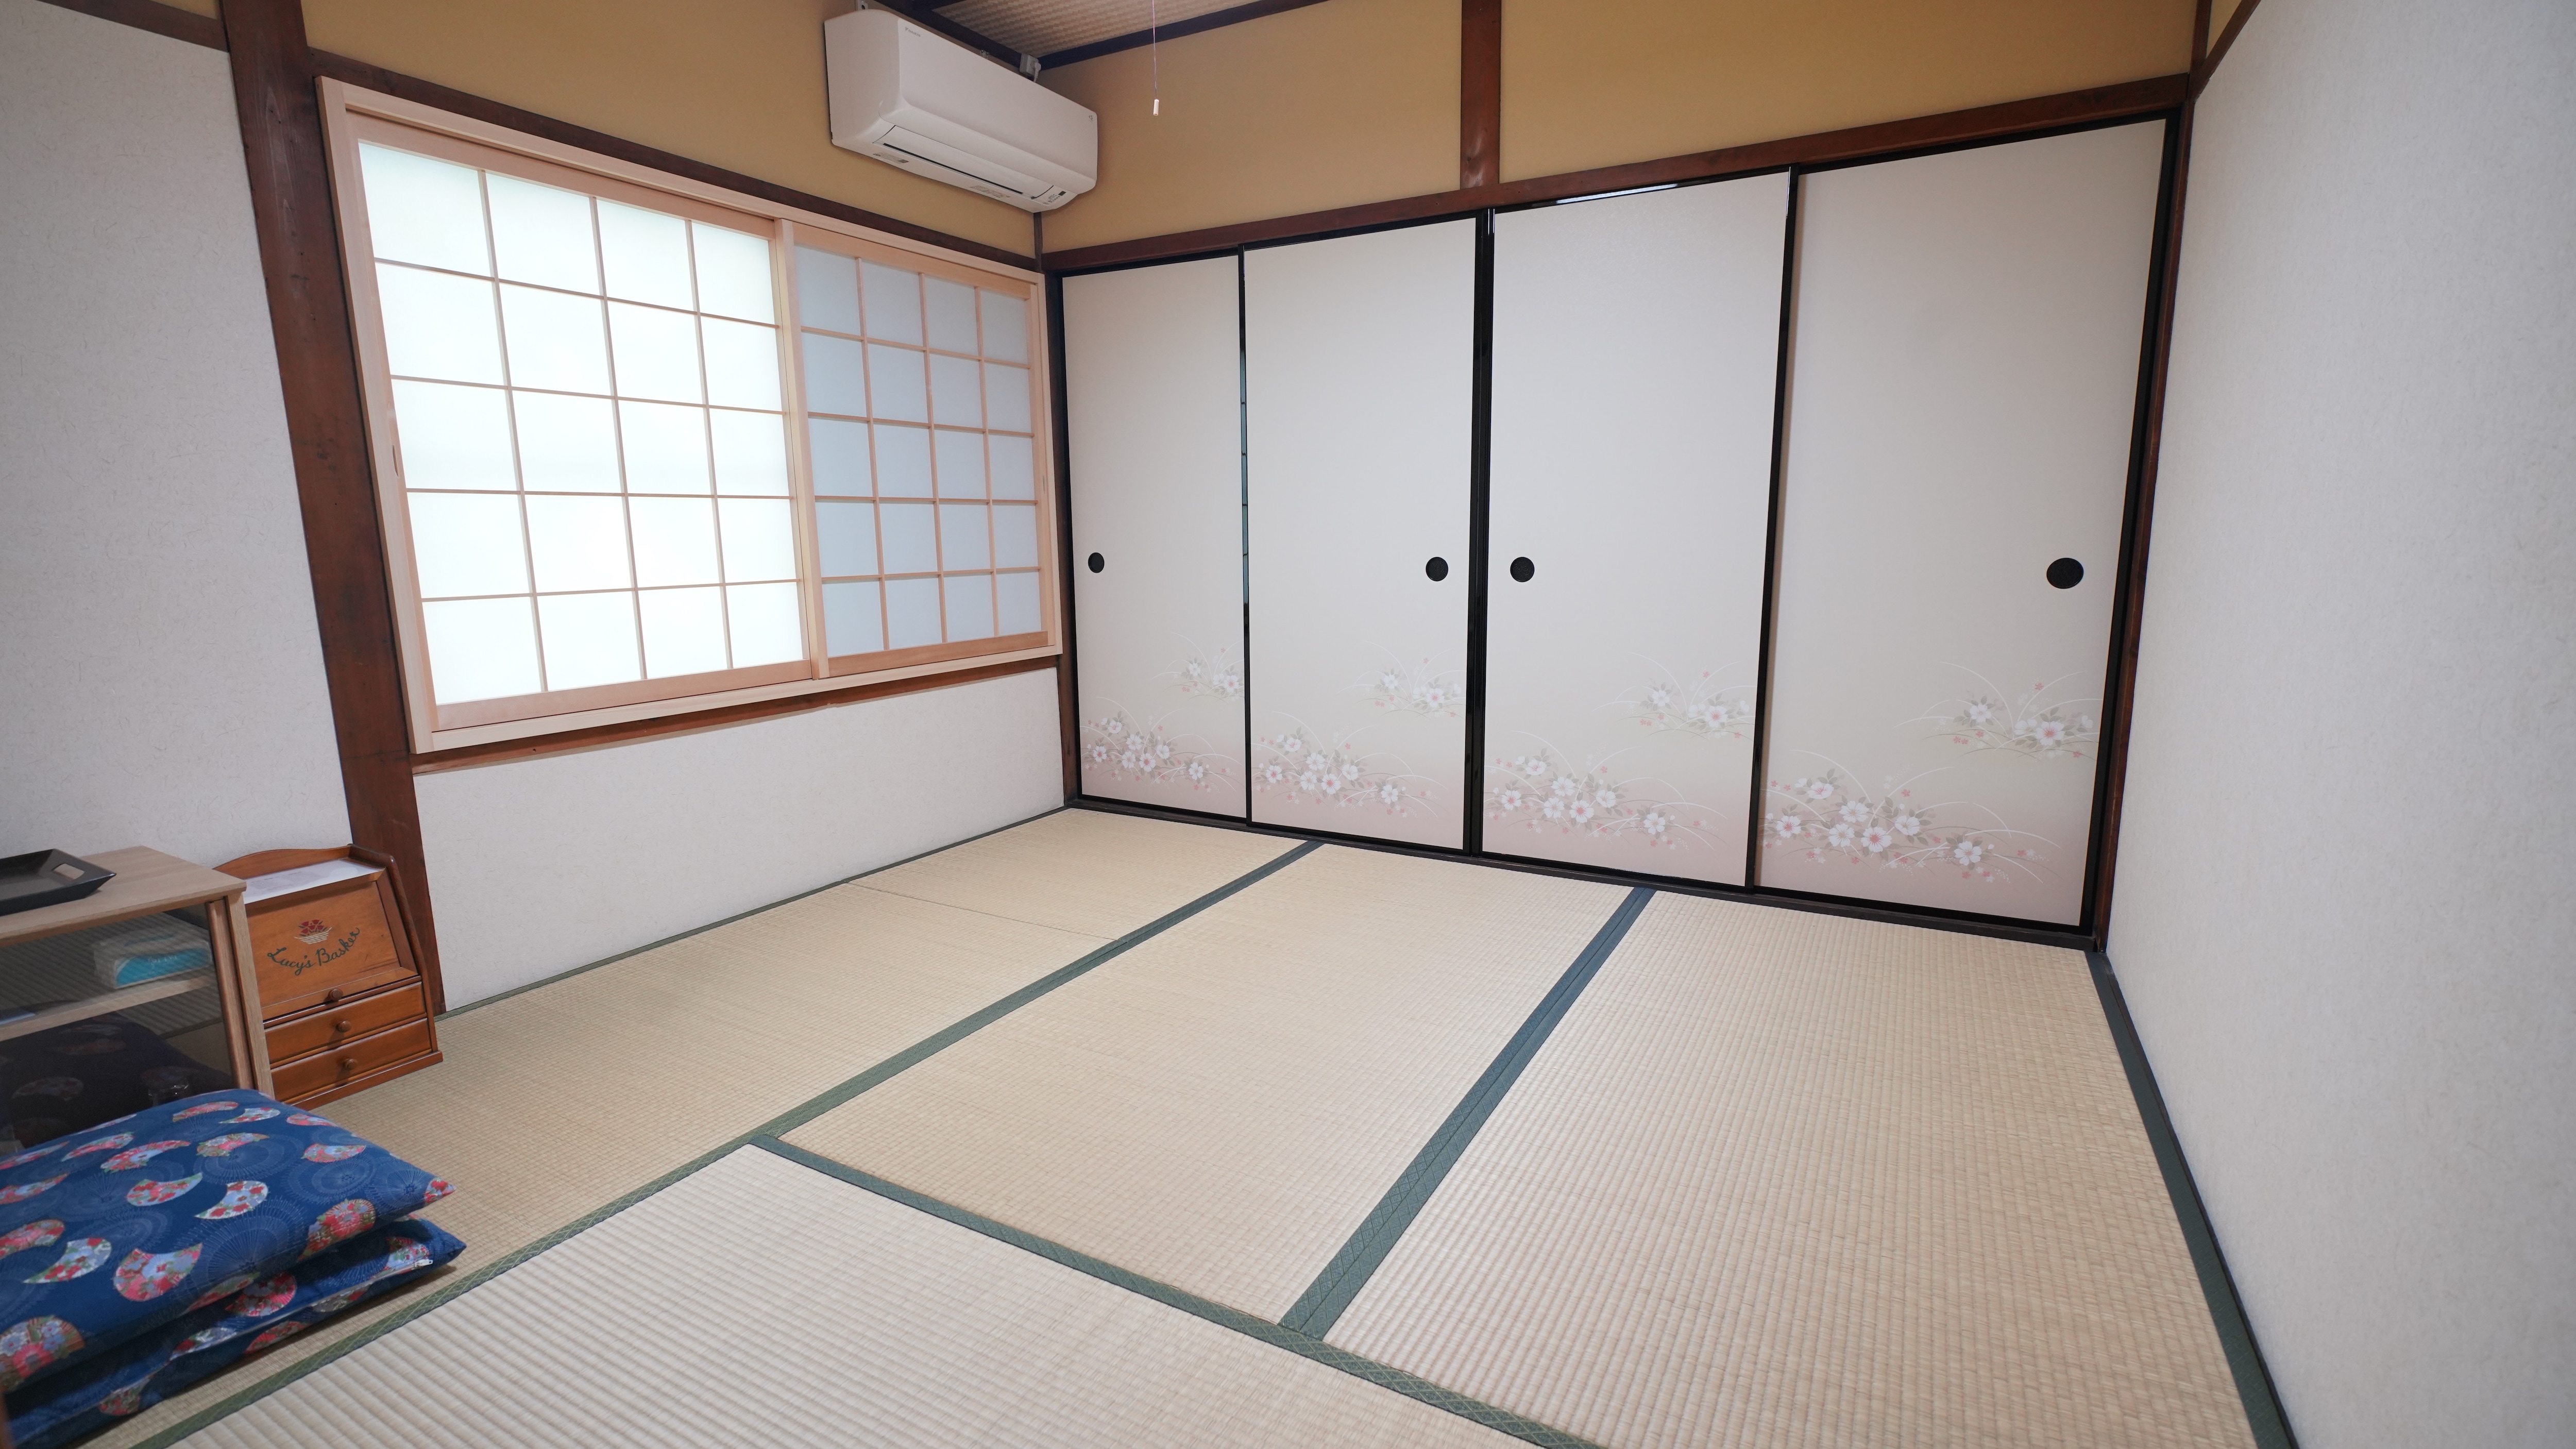 Second floor, Japanese-style double room